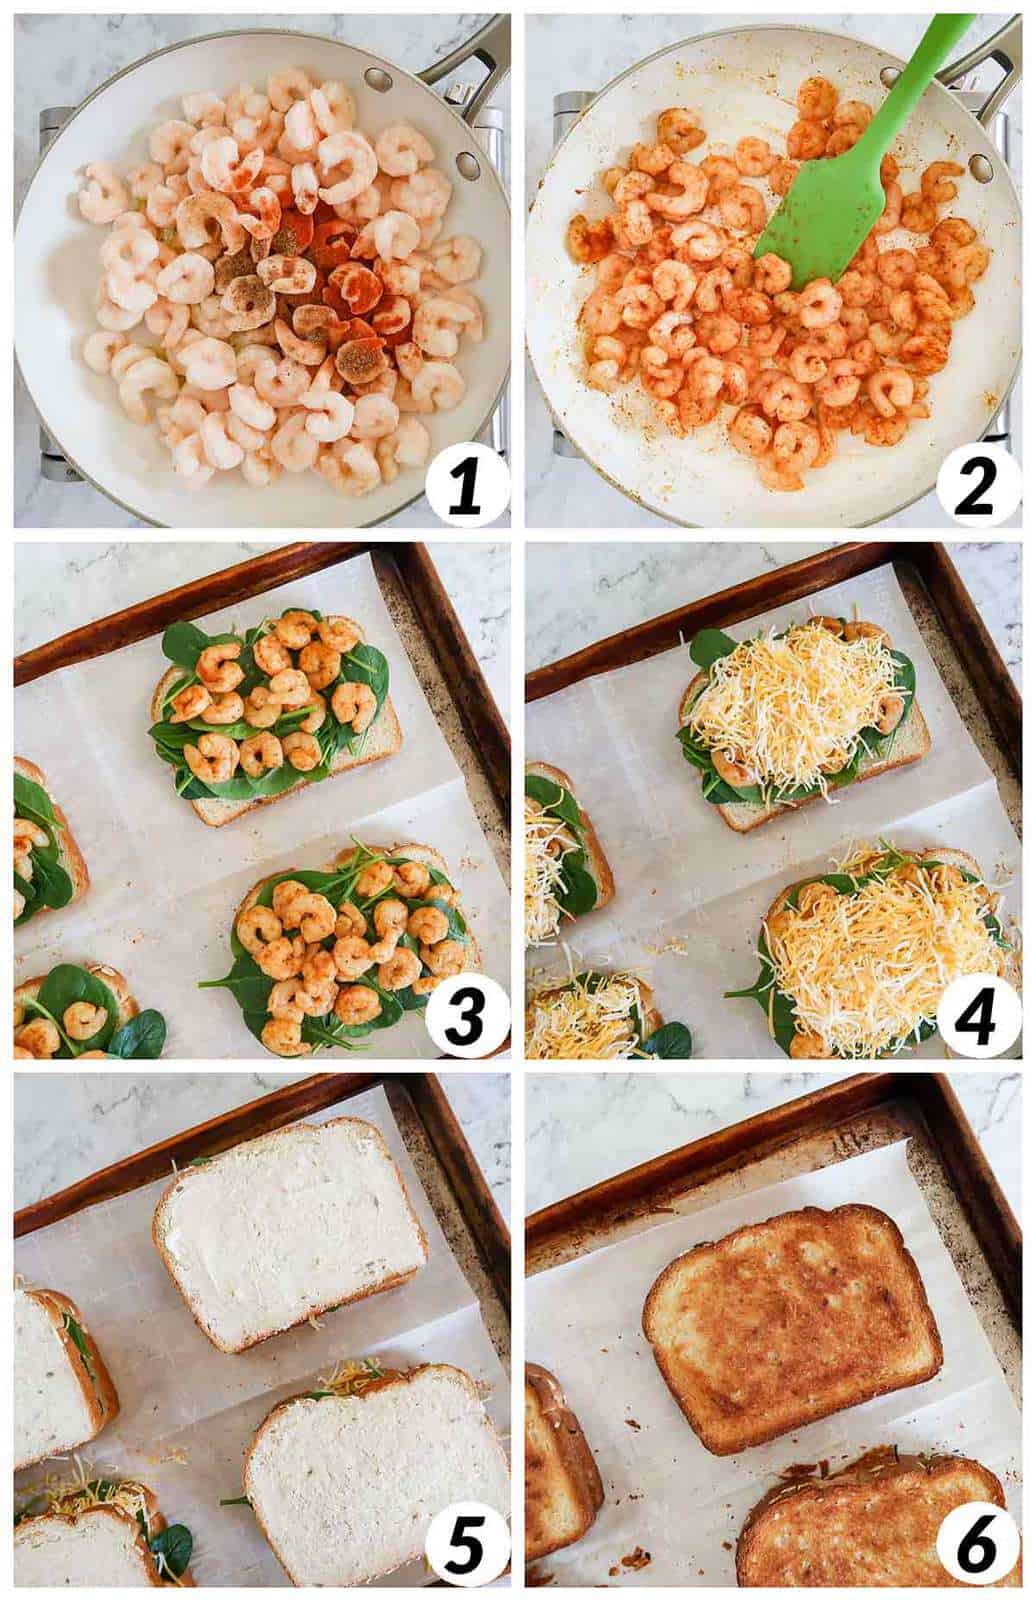 Six panel grid of process shots- cooking shrimp, assembling grilled cheese, and baking.